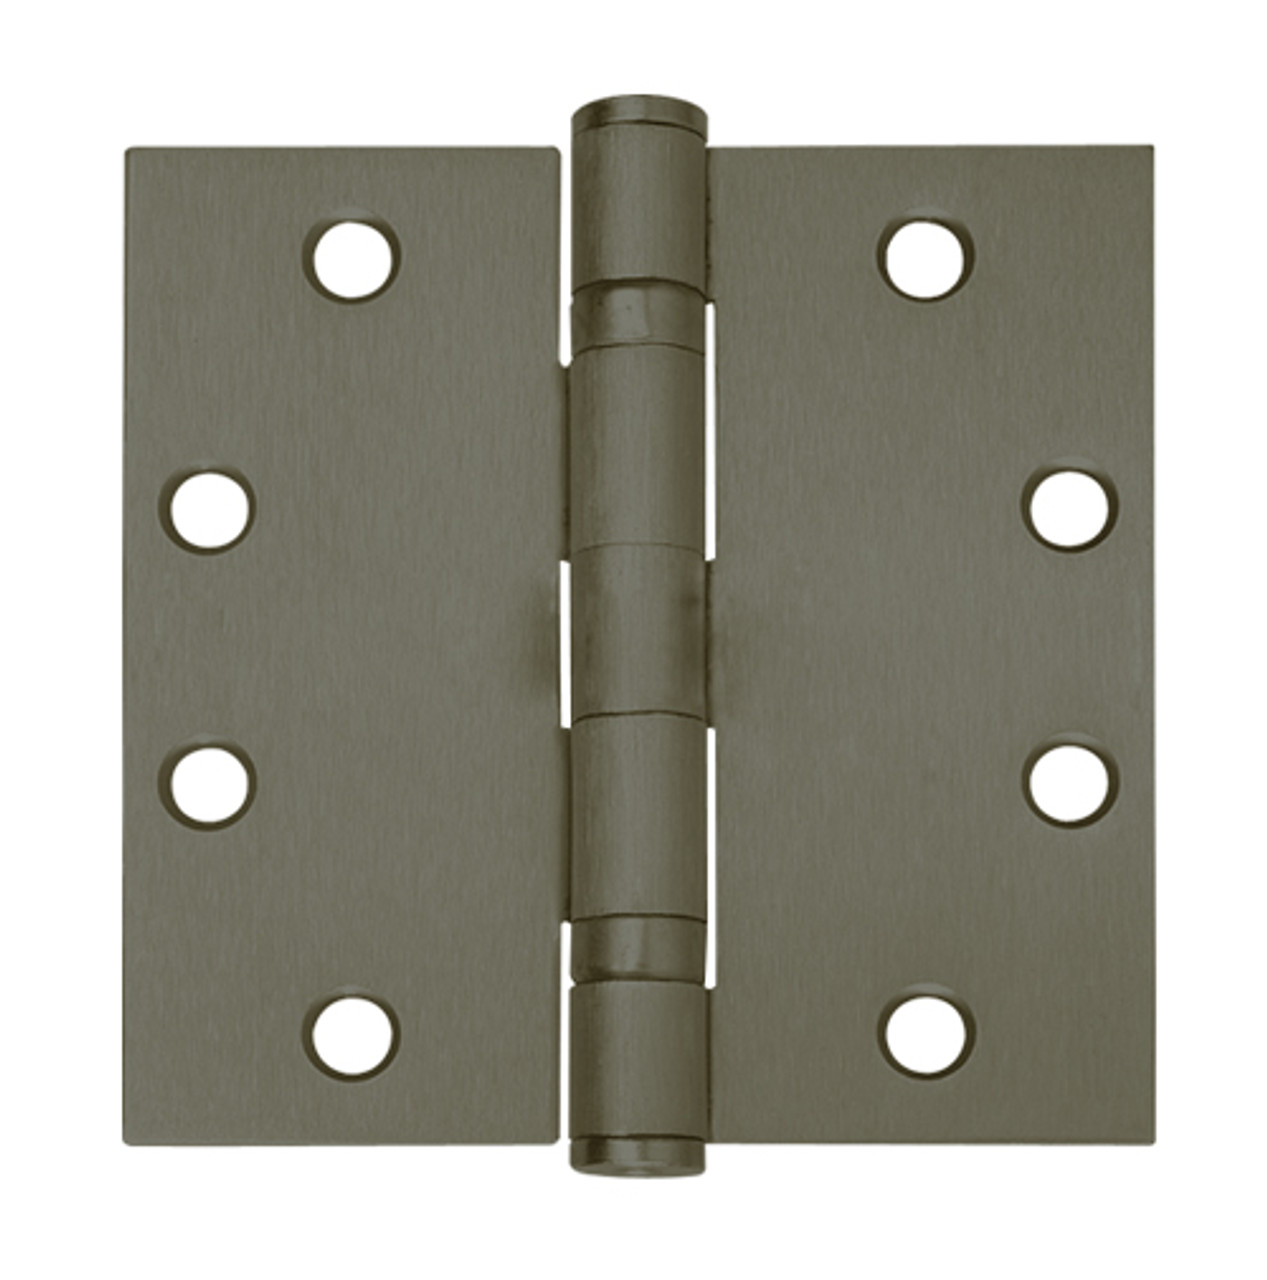 5BB1-5x4-5-613-TW8 IVES 5 Knuckle Ball Bearing Full Mortise Hinge with Electric Thru-Wire in Dark Bronze